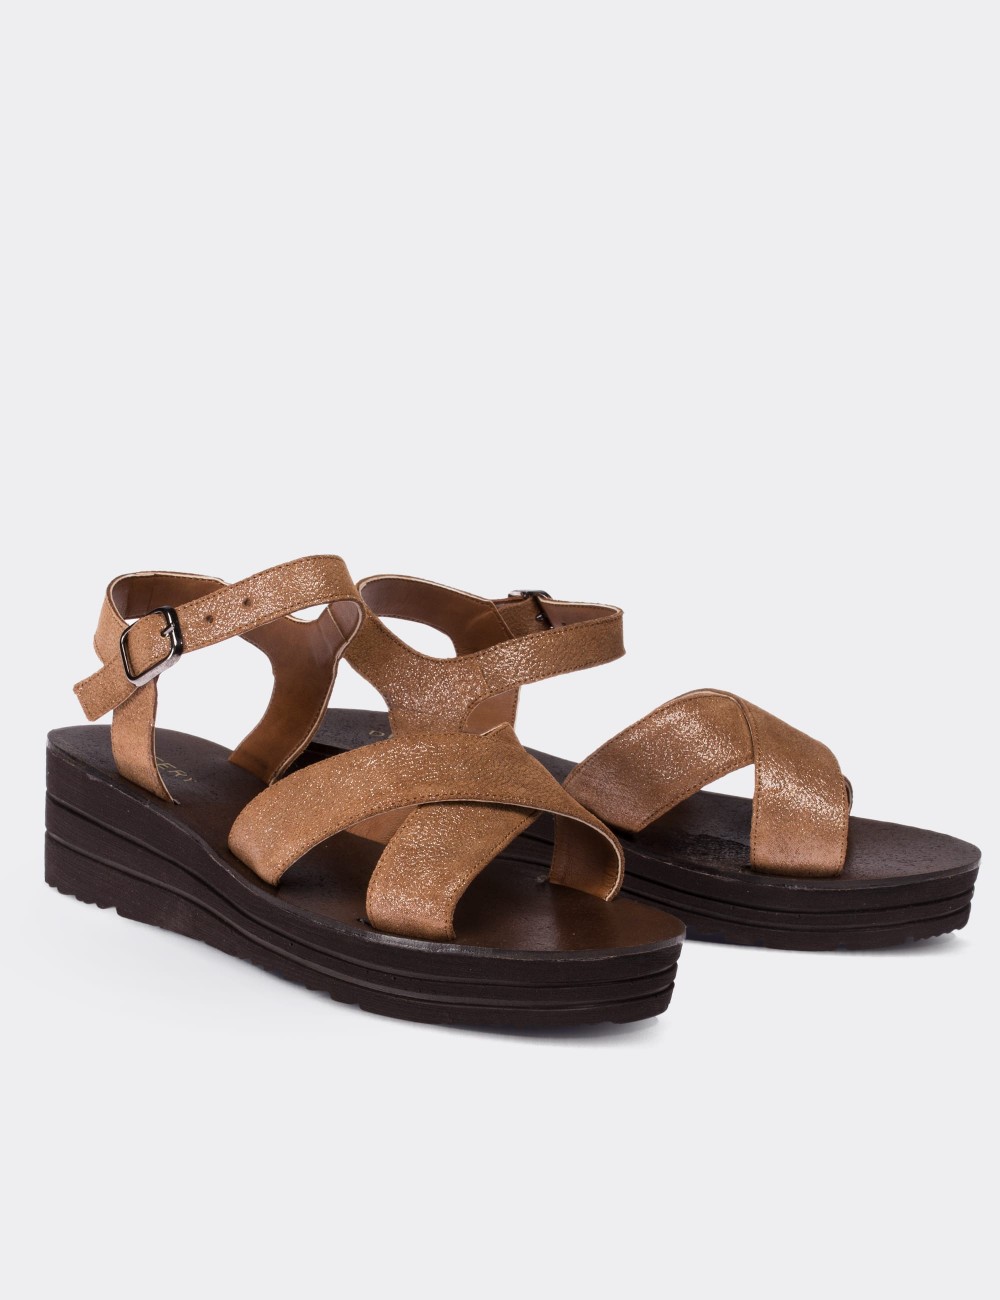 Tan  Leather  Sandals - 02124ZTBAC01